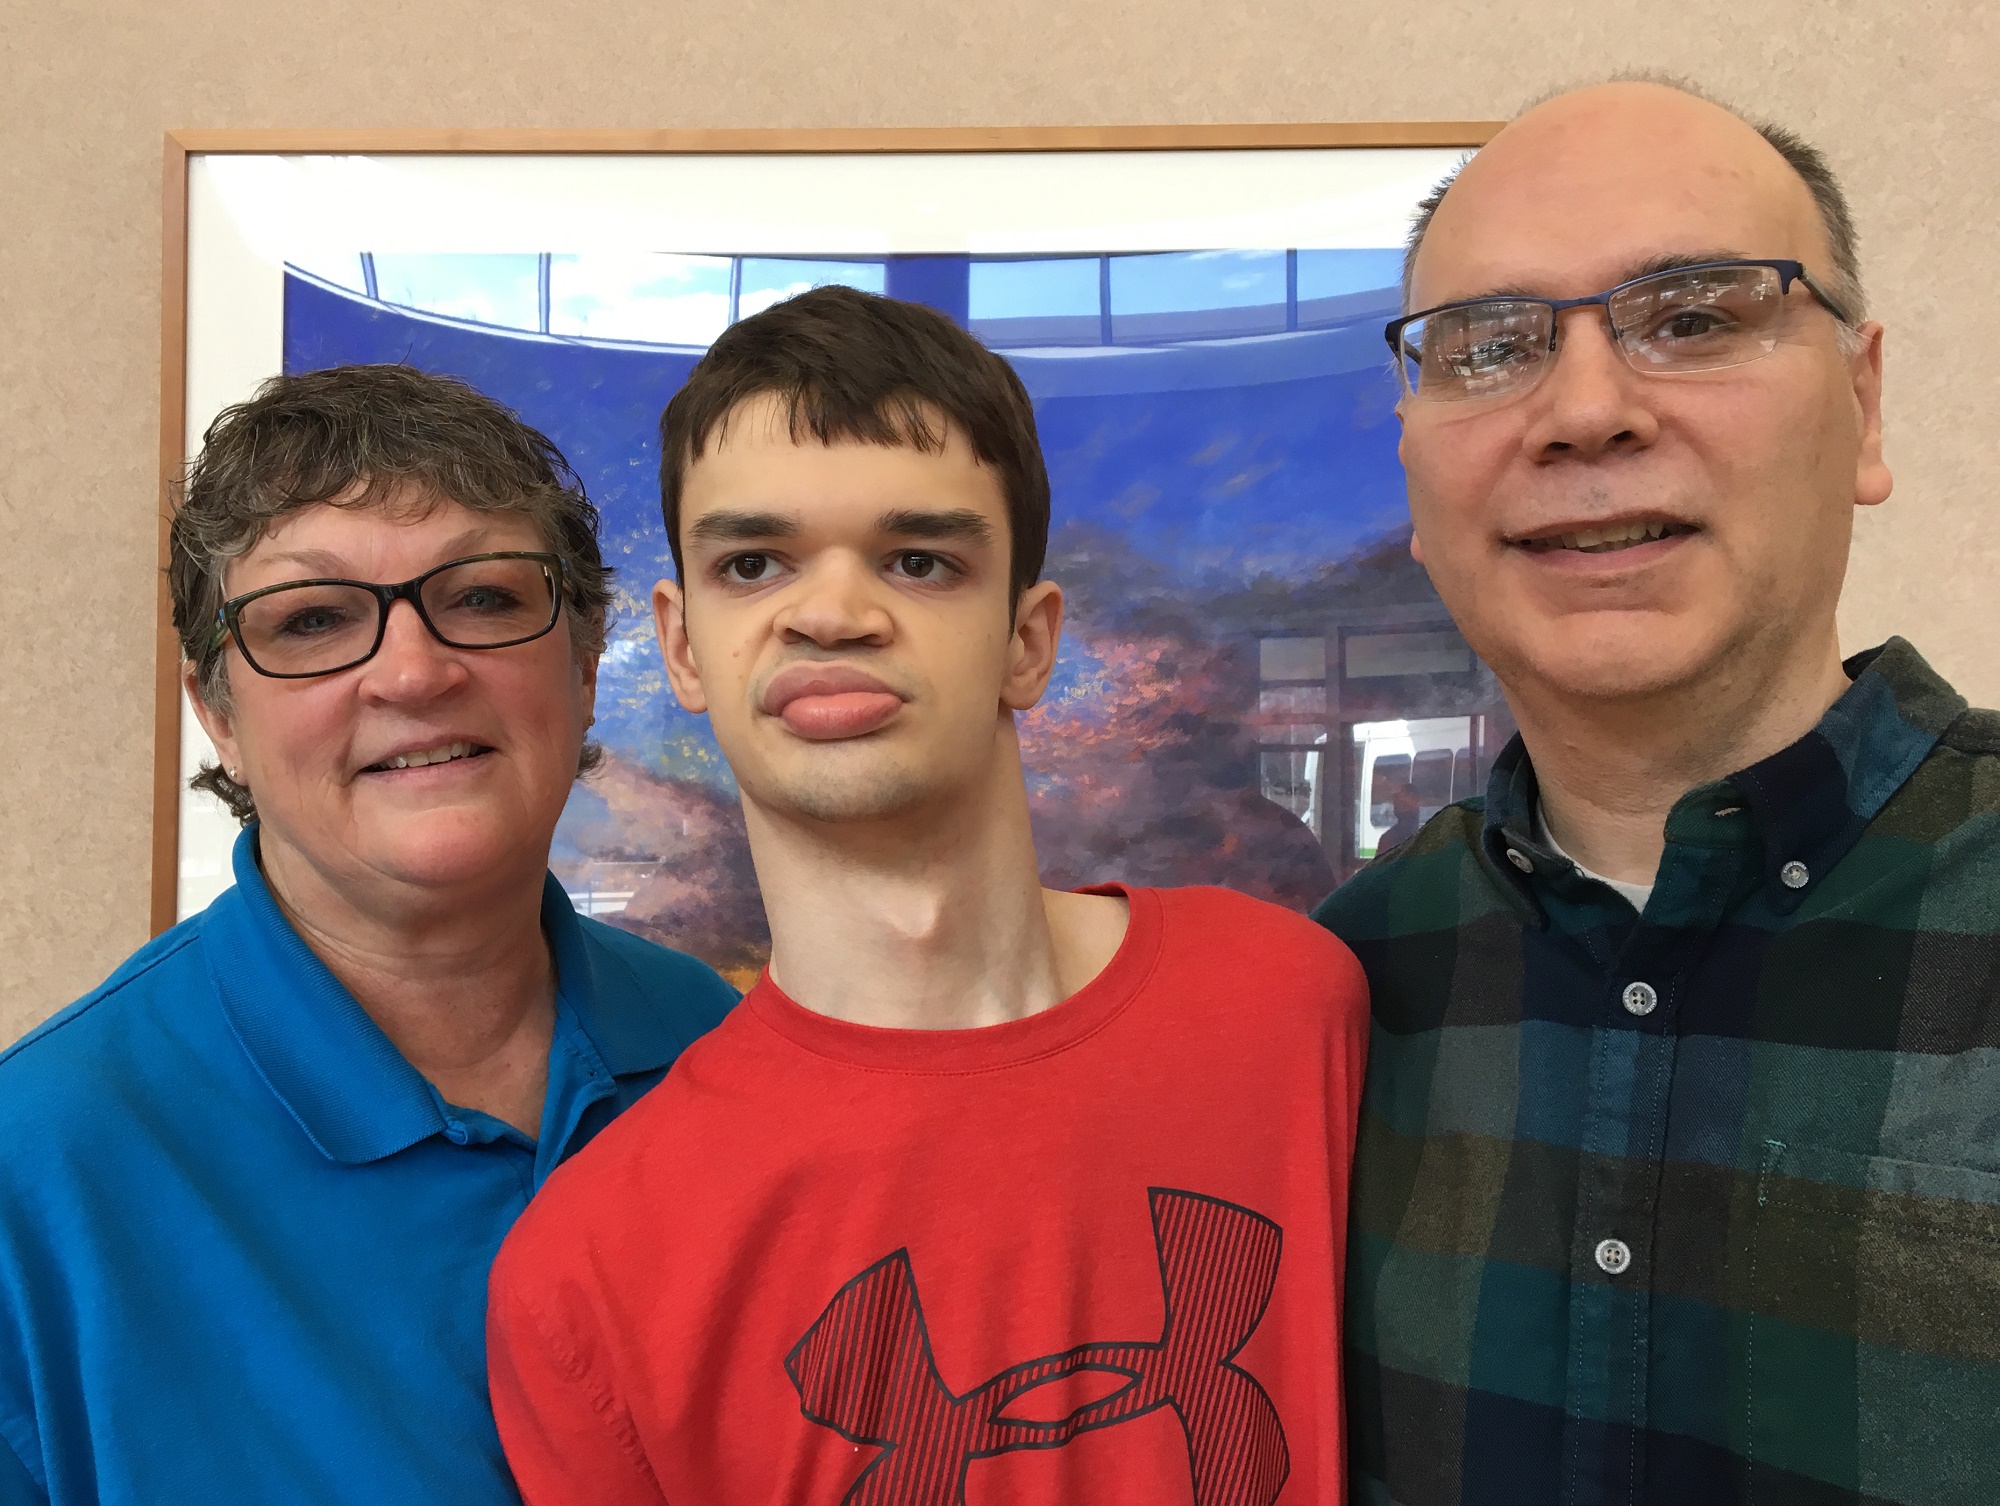 Tanner's tale: Epilepsy, autism and a team that won't quit